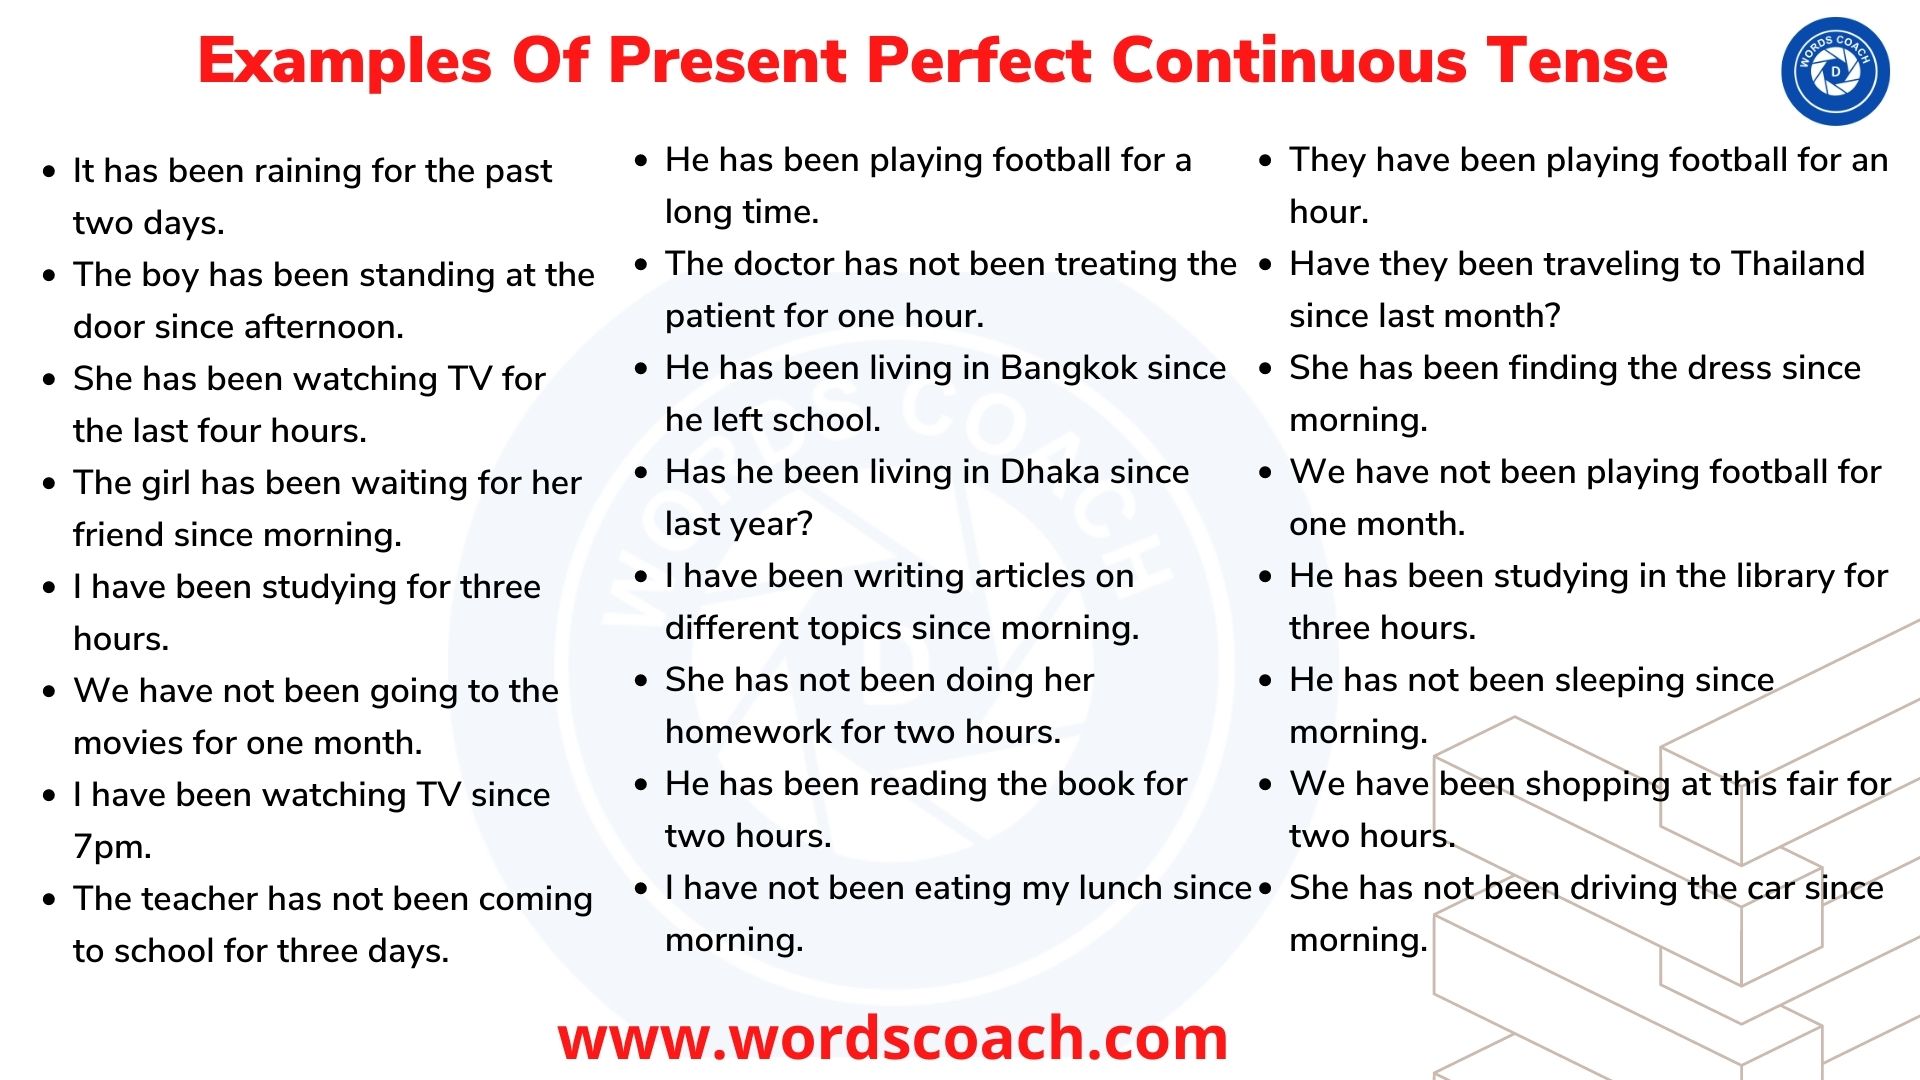 Examples Of Present Perfect Continuous Tense - wordscoach.com